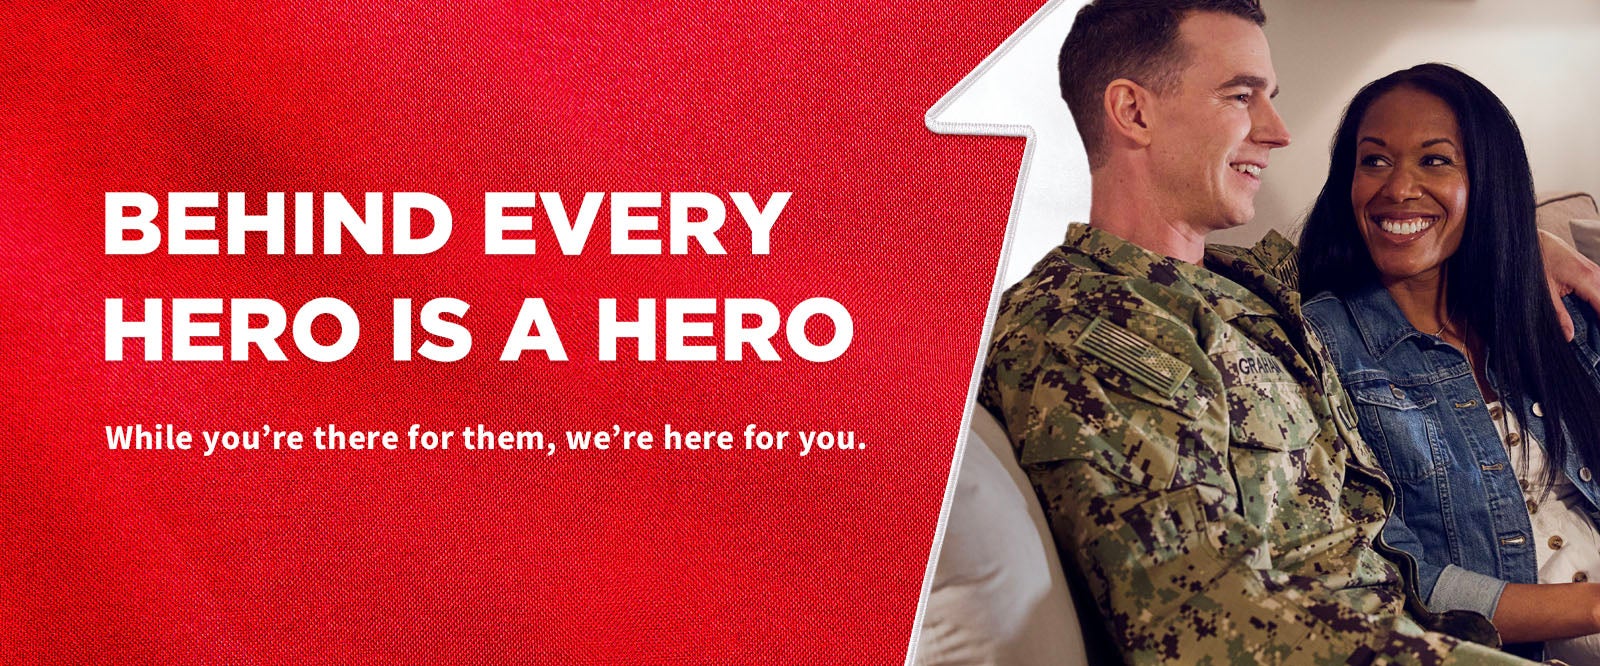 Banner image with a soldier and wife with the text "Behind Every Hero is a Hero" and "While you're there for them, we're here for you.".